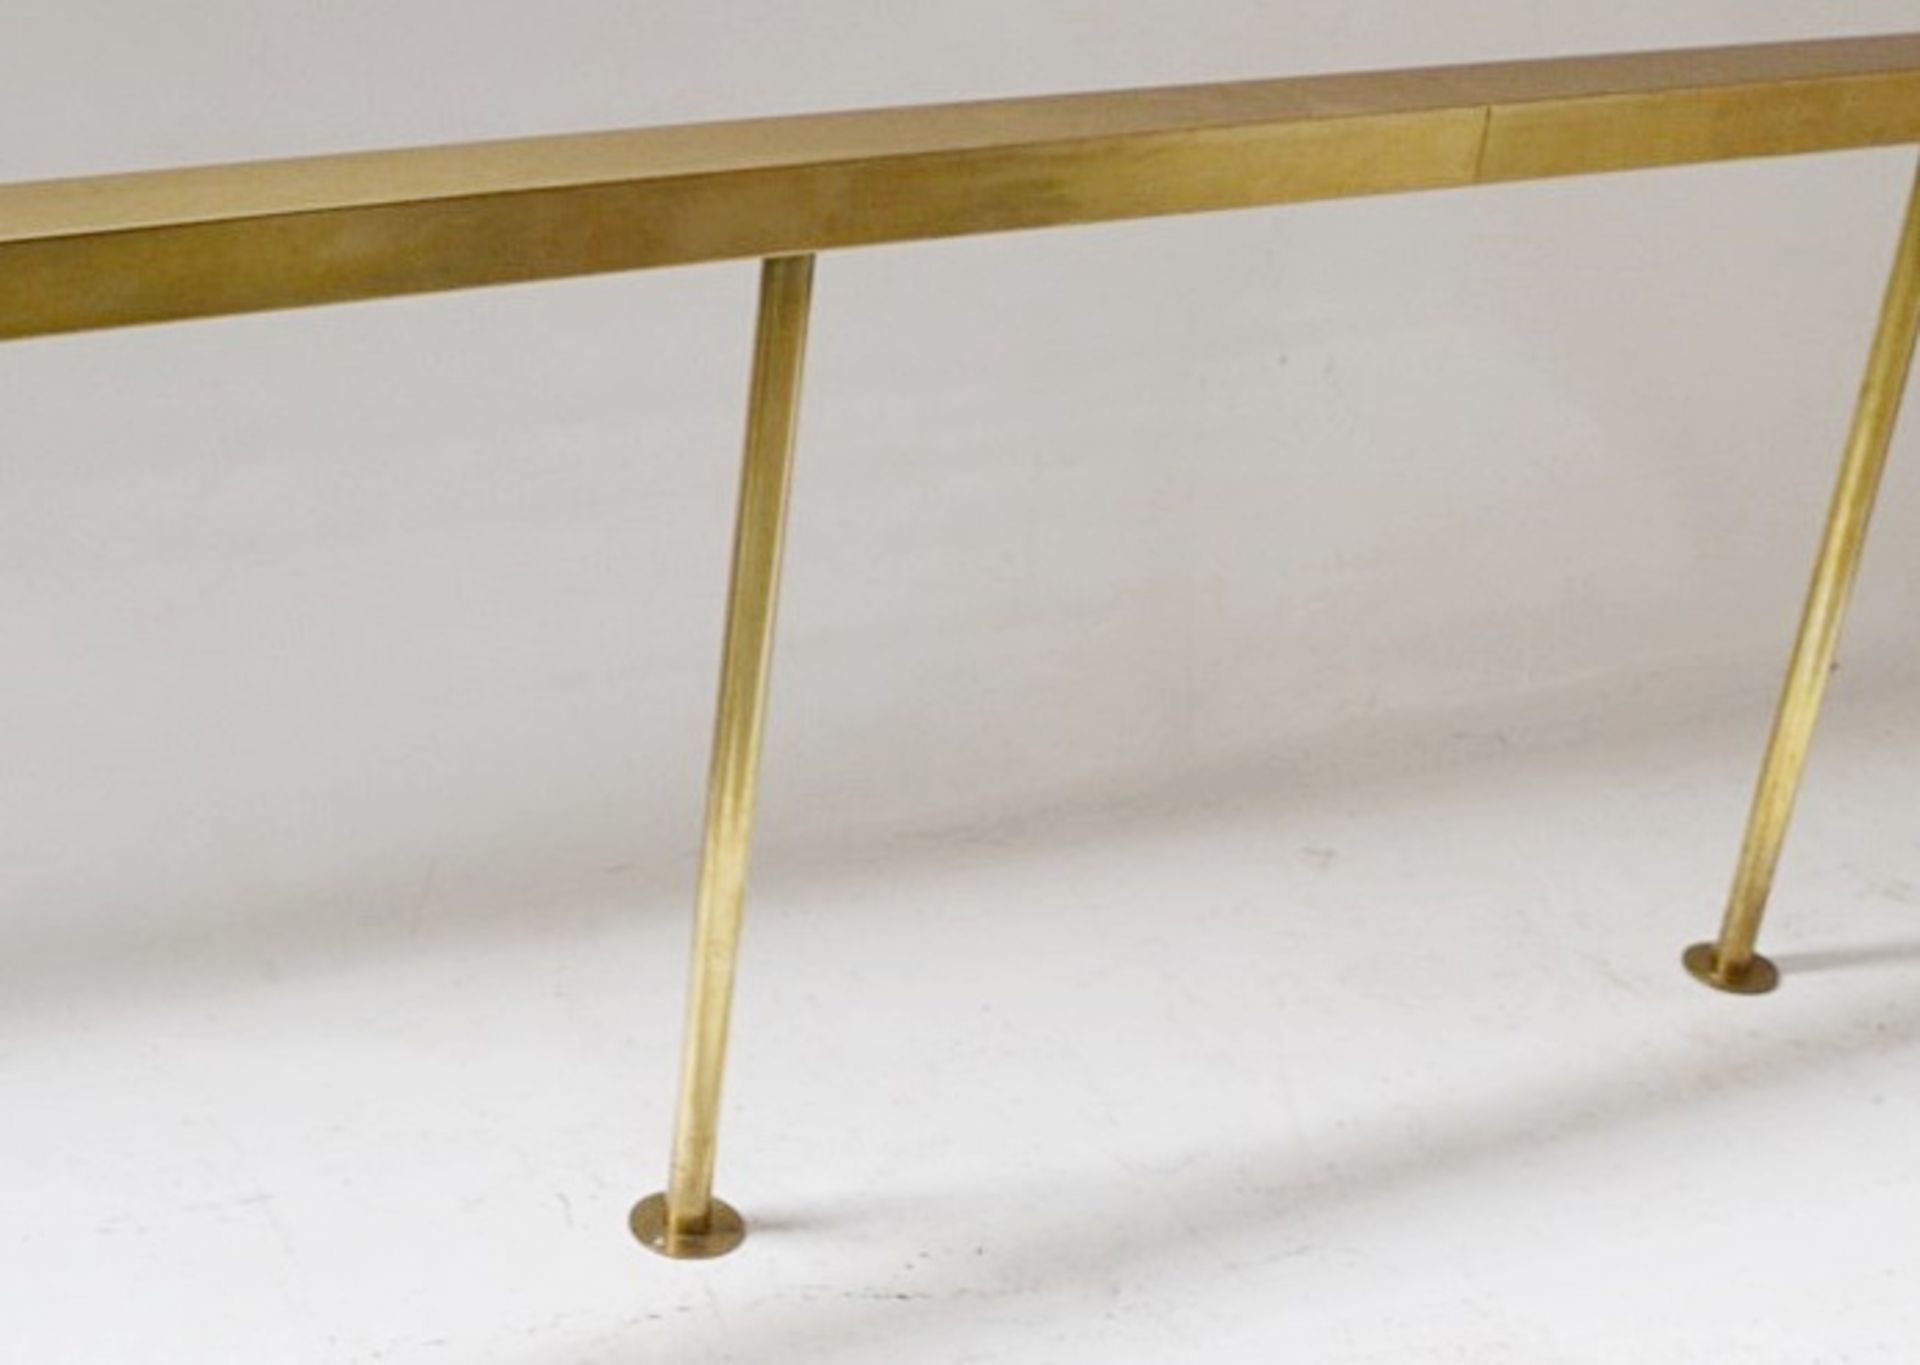 1 x Bespoke Table Mounted LED Restaurant Bar LIght In Brass With Acrylic Diffusers - 3 Metres Wide - Image 4 of 8